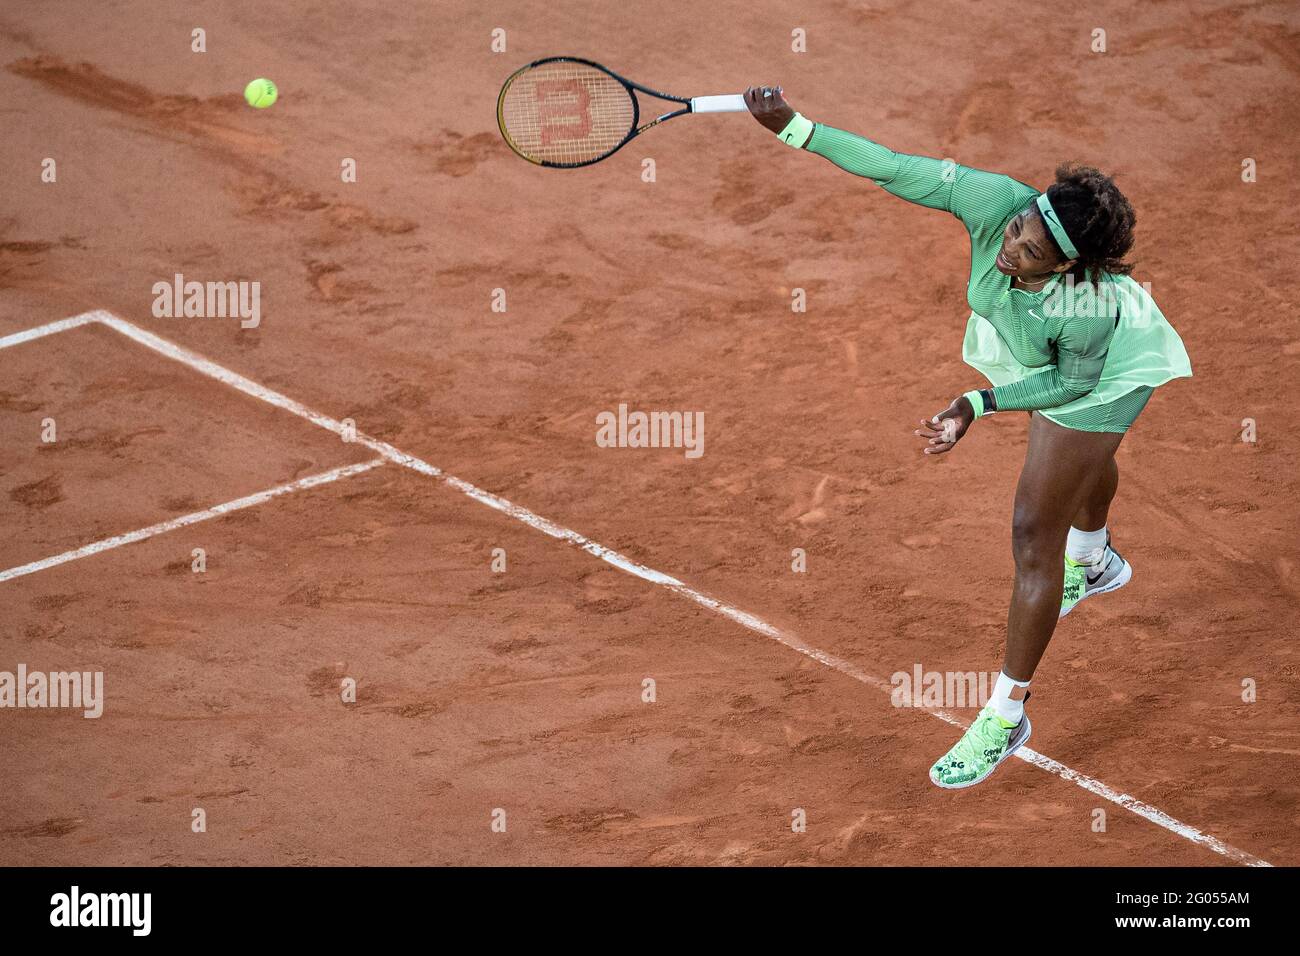 Paris, France. 31st May, 2021. Serena Williams of the United States serves the ball during the women's first round match against Irina-Camelia Begu of Romania at the French Open tennis tournament at Roland Garros in Paris, France, May 31, 2021. Credit: Aurelien Morissard/Xinhua/Alamy Live News Stock Photo